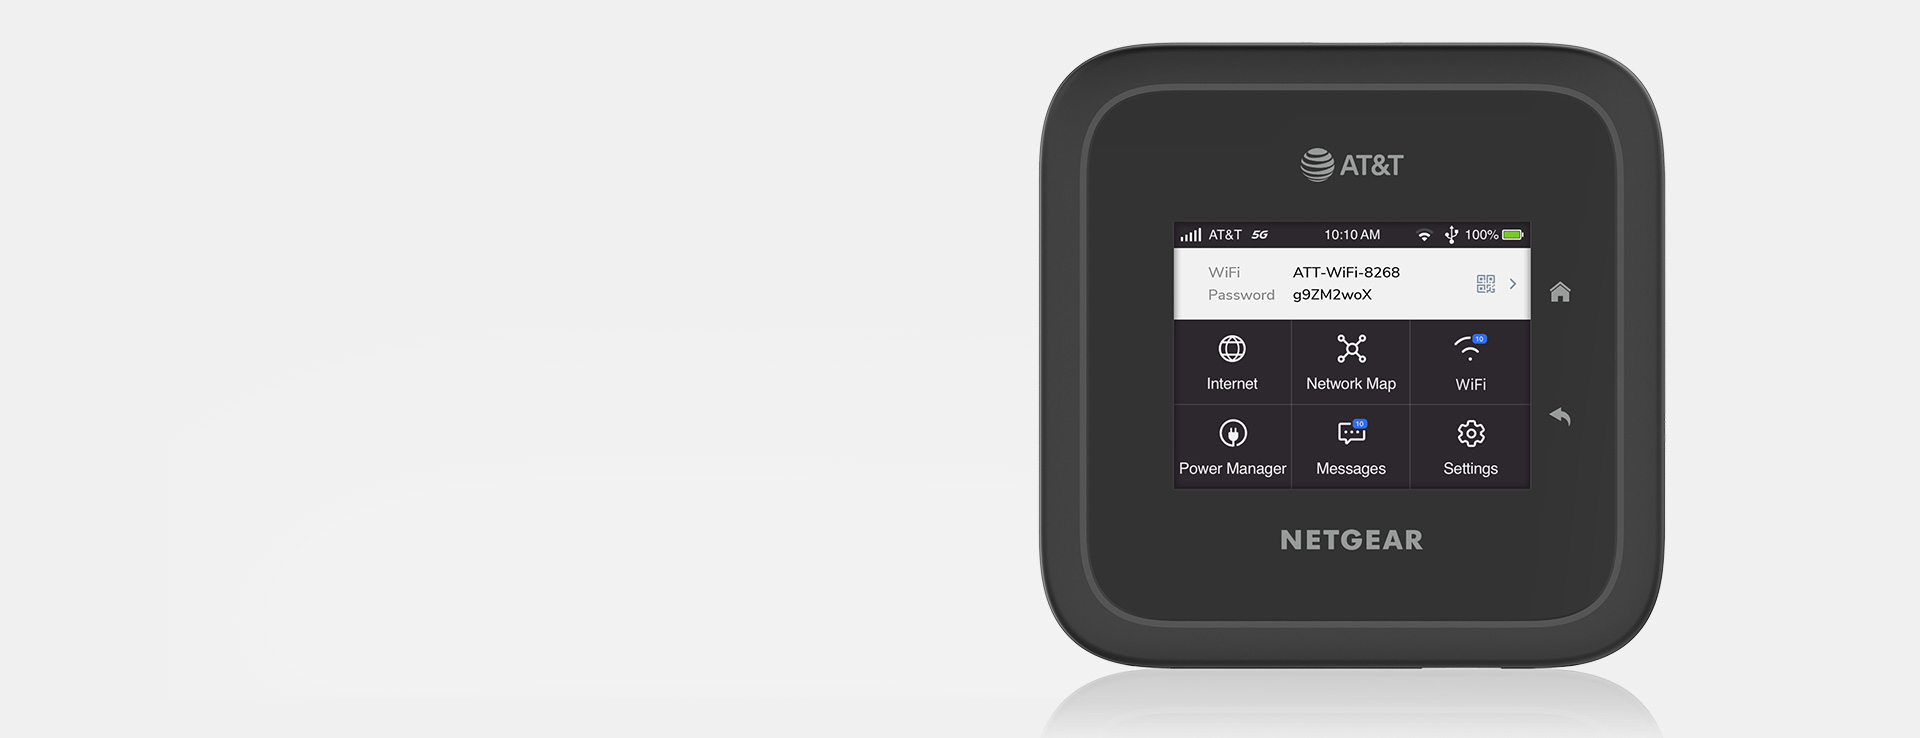 Netgear's new M6 Pro router lets you use fast 5G anywhere you go